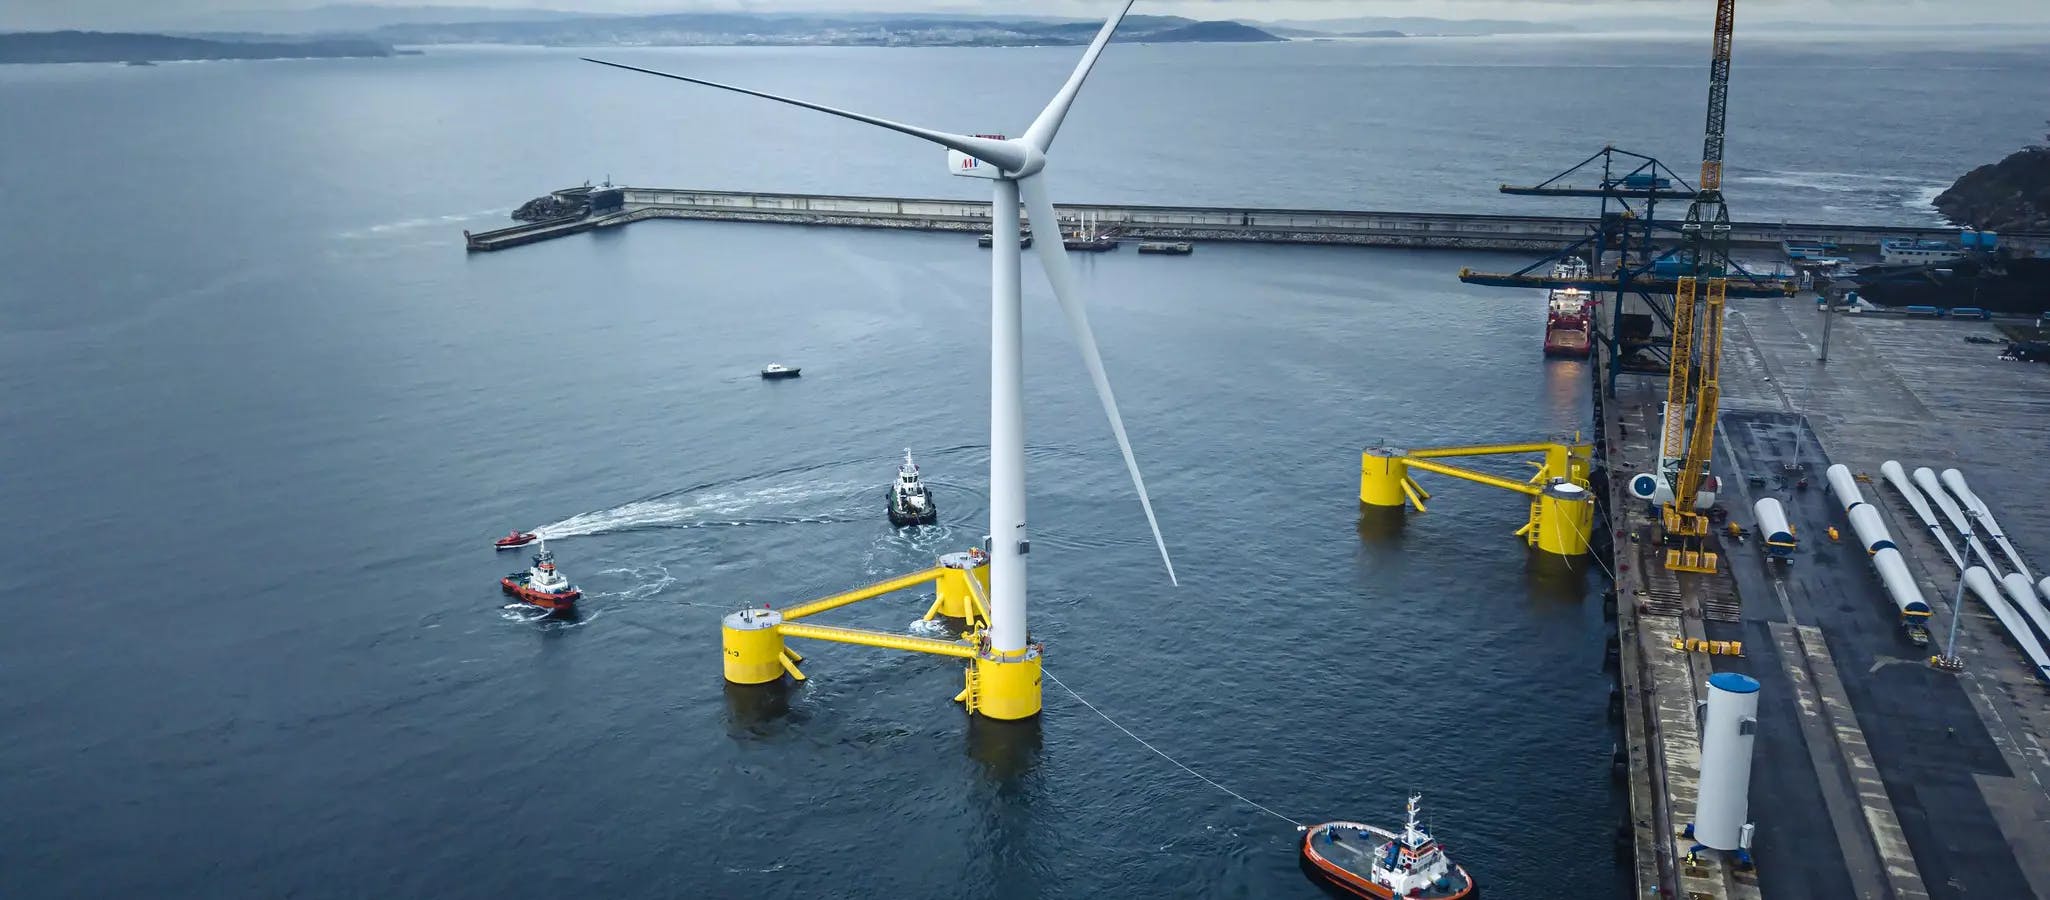 Episode 5: The rise of Floating Wind
Guests:
Cian Conroy, Senior Manager, Principle Power
Pablo Necochea, Lead Developer – Floating Offshore Wind, Vestas
Rebecca Williams, Director of COP26, Global Wind Energy Council